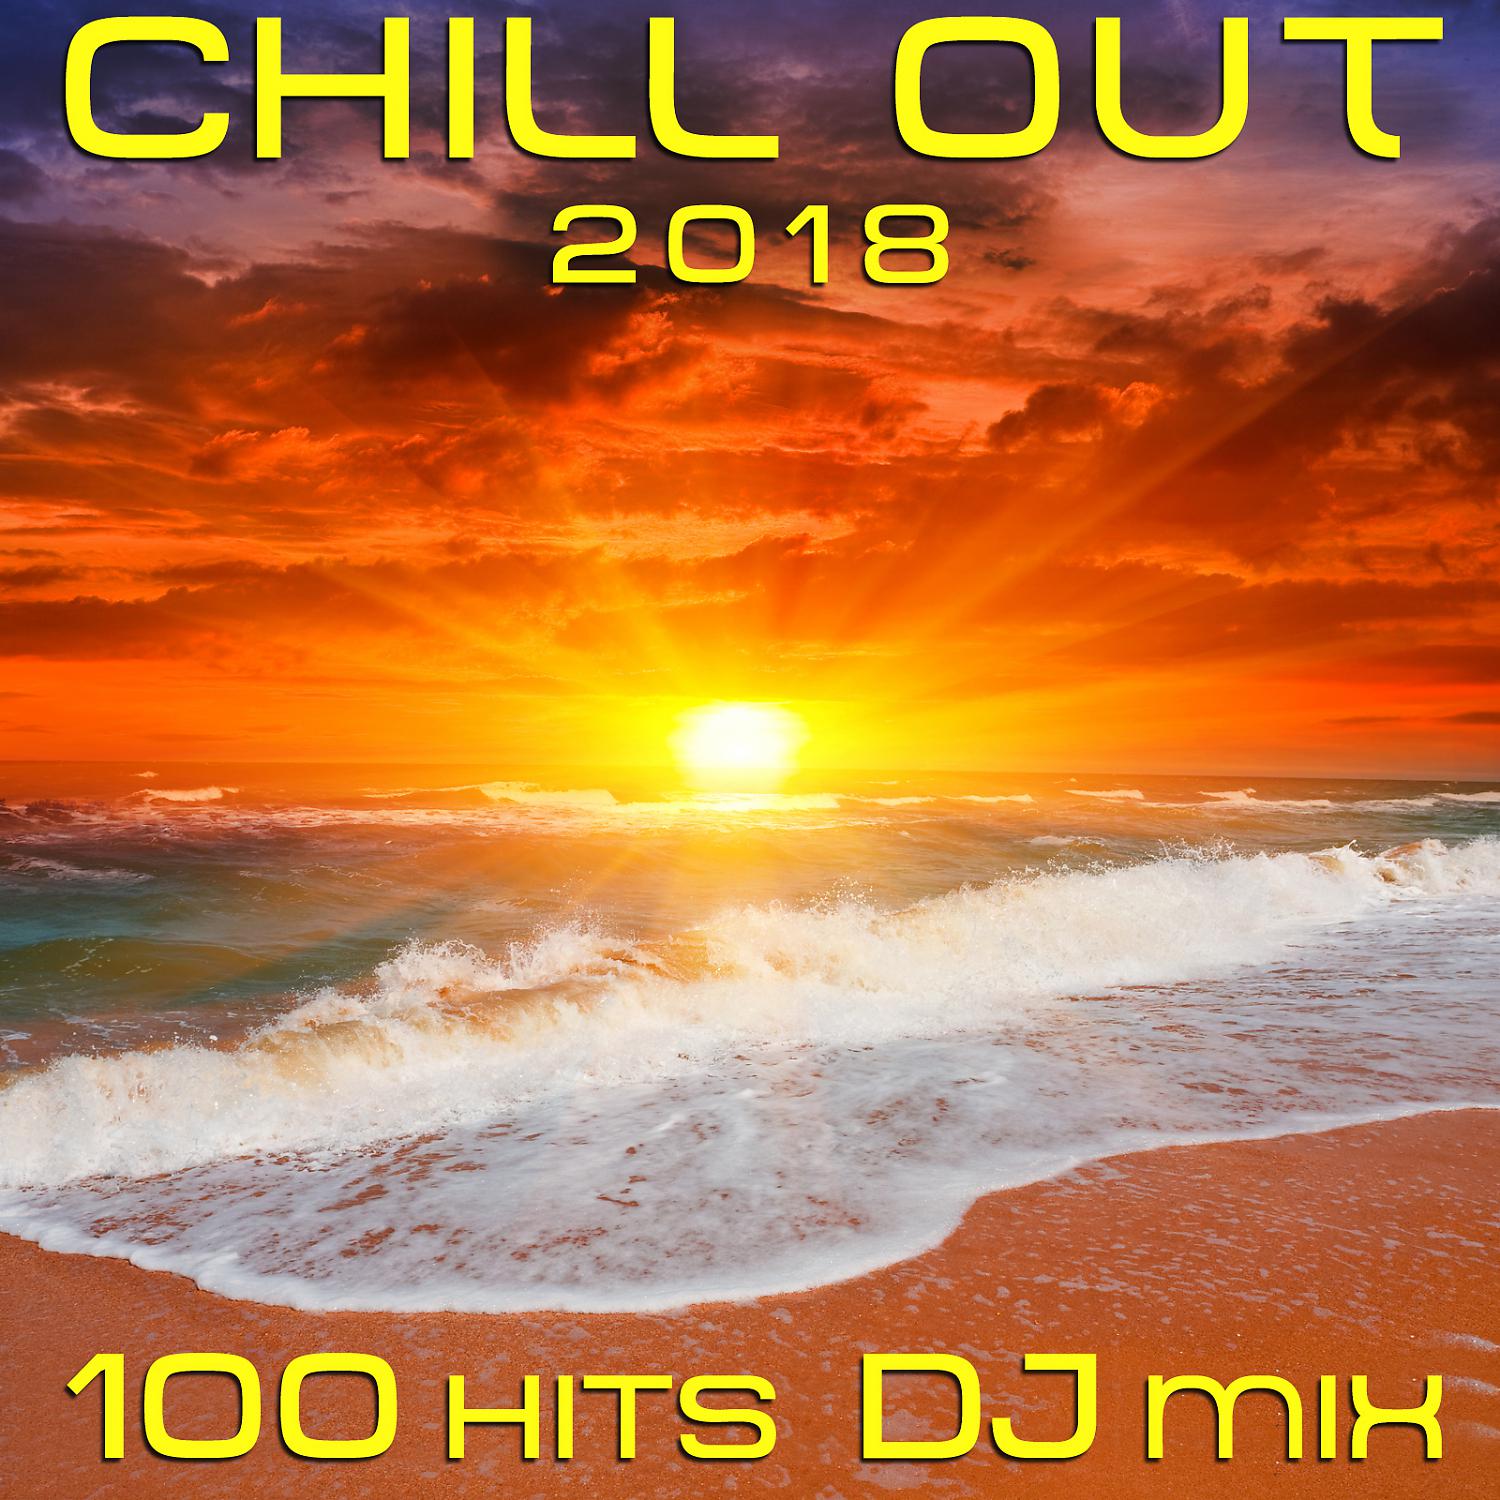 Chill blues. Chill out. Chillout 2018 альбом. The Chill. Venus Chillout.